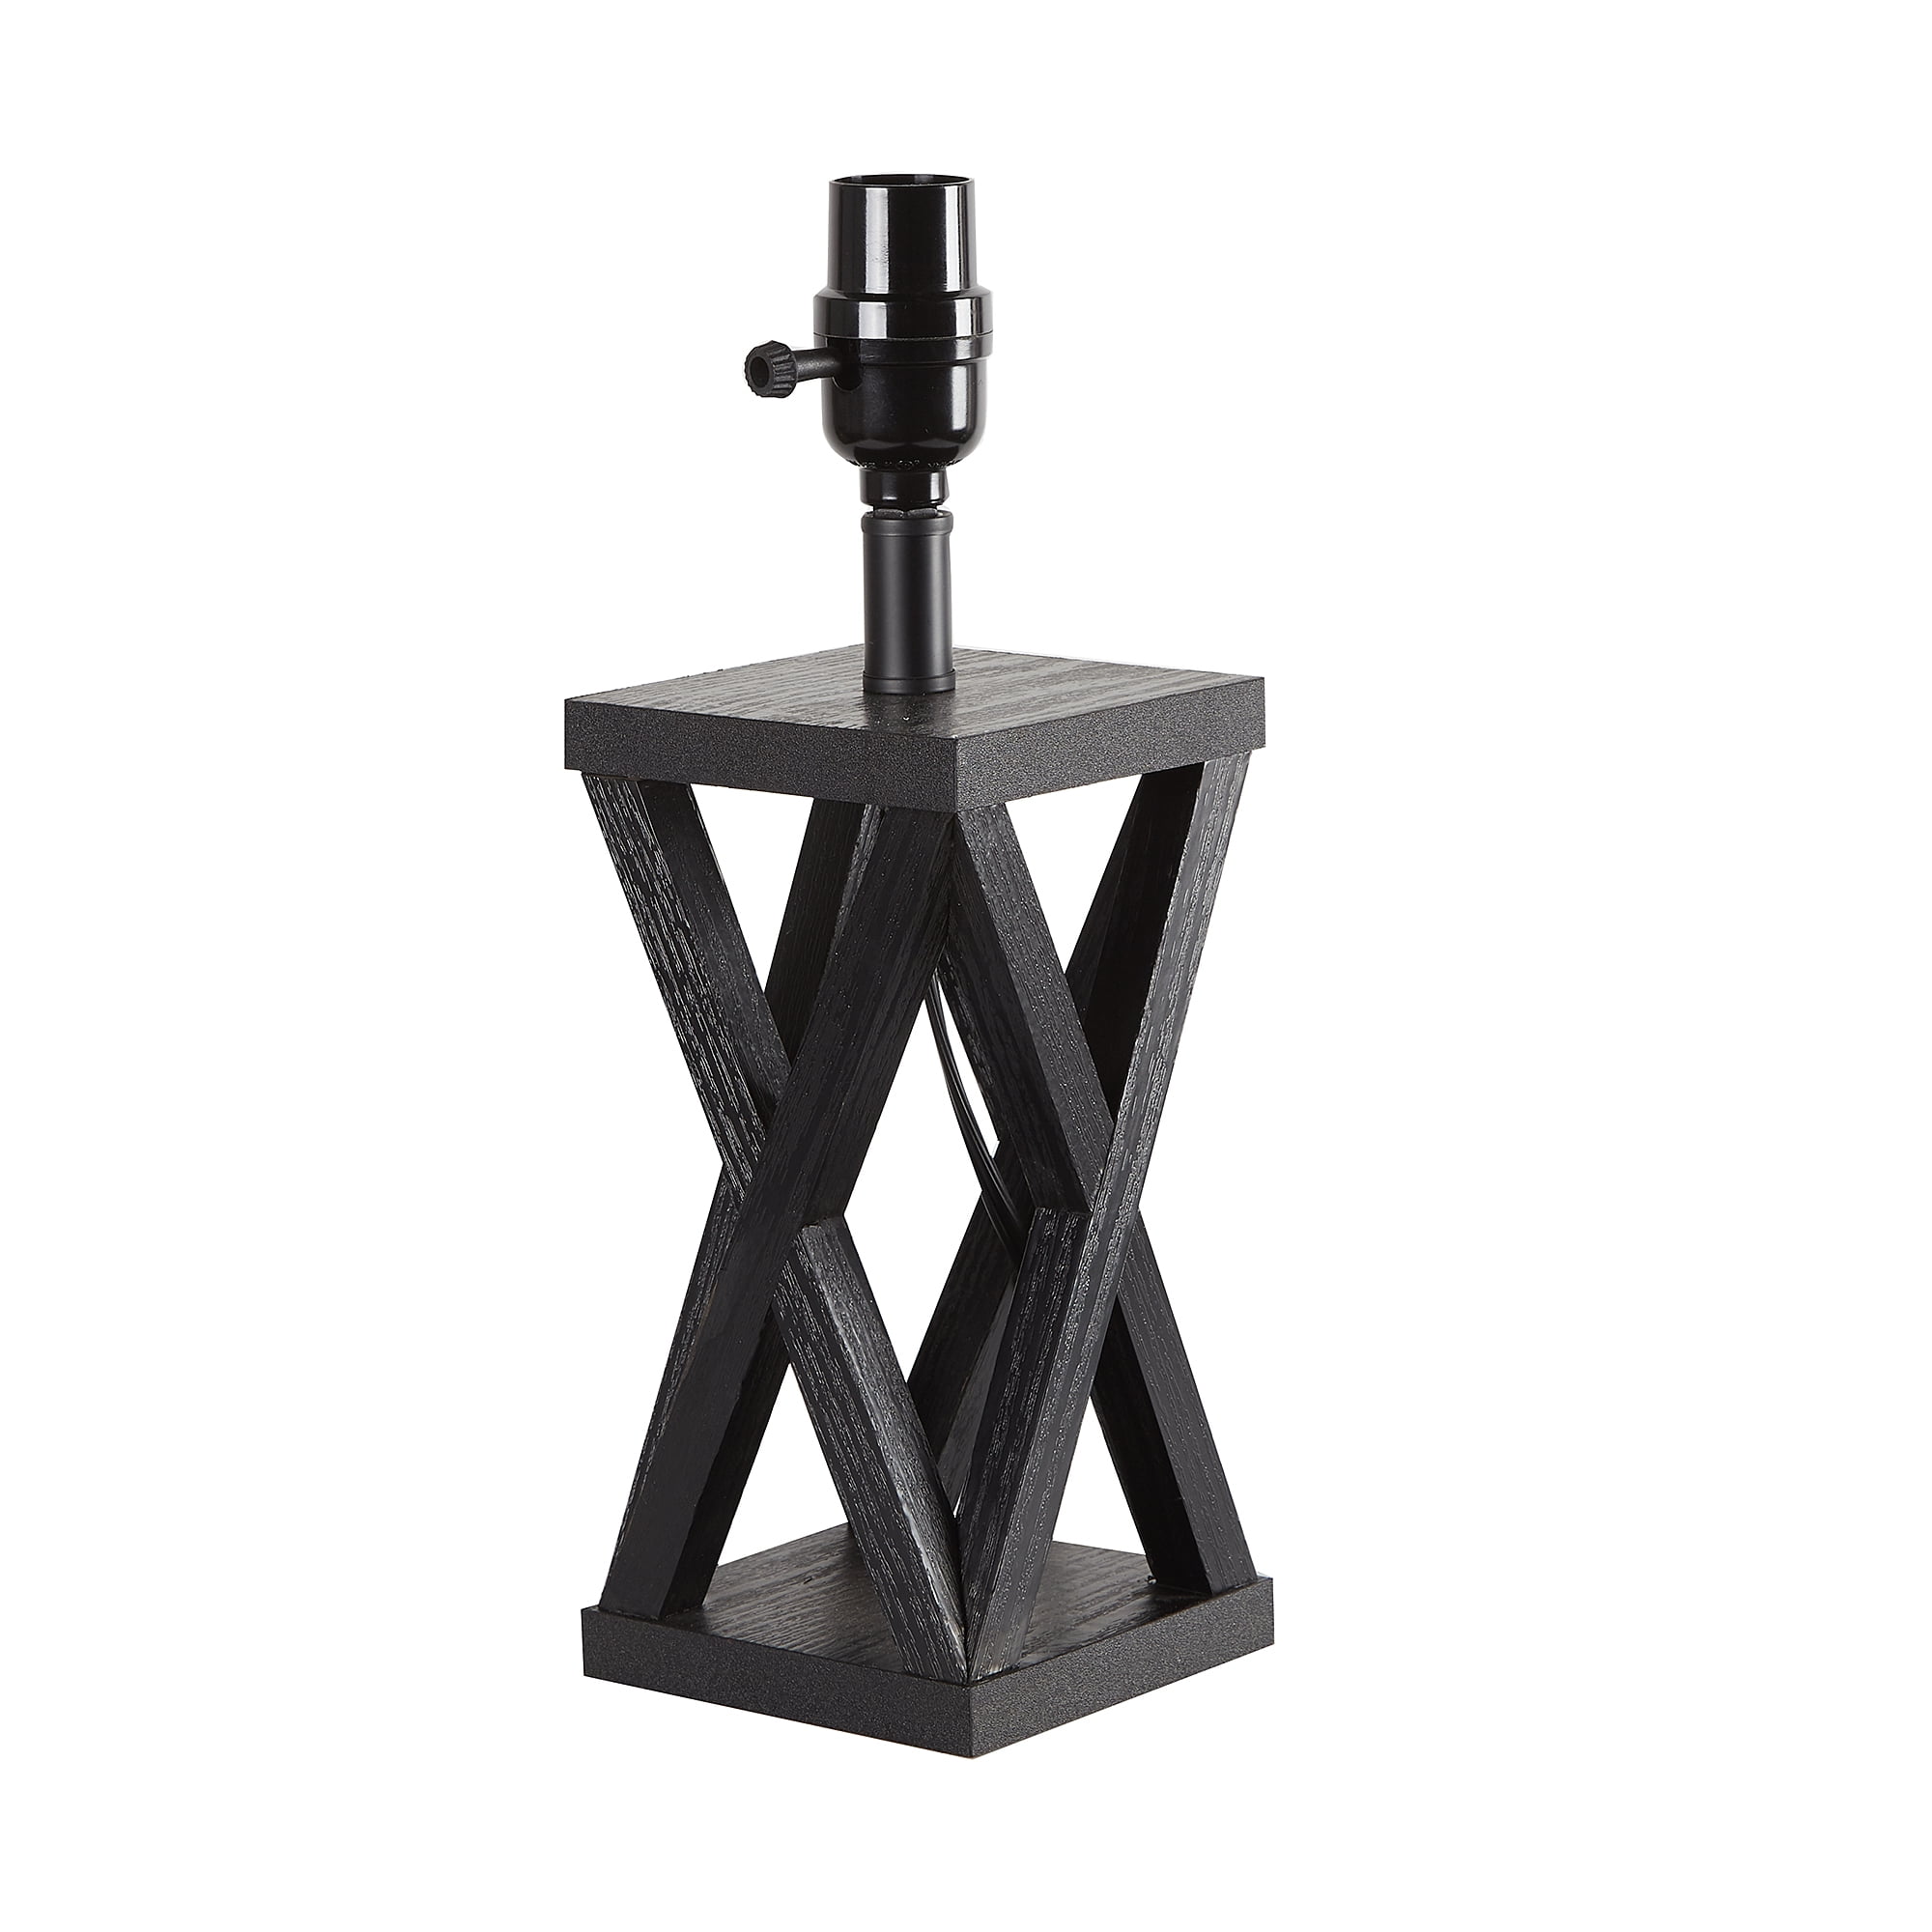 Better Homes & Gardens Crossmill Accent Lamp Base with Black finish